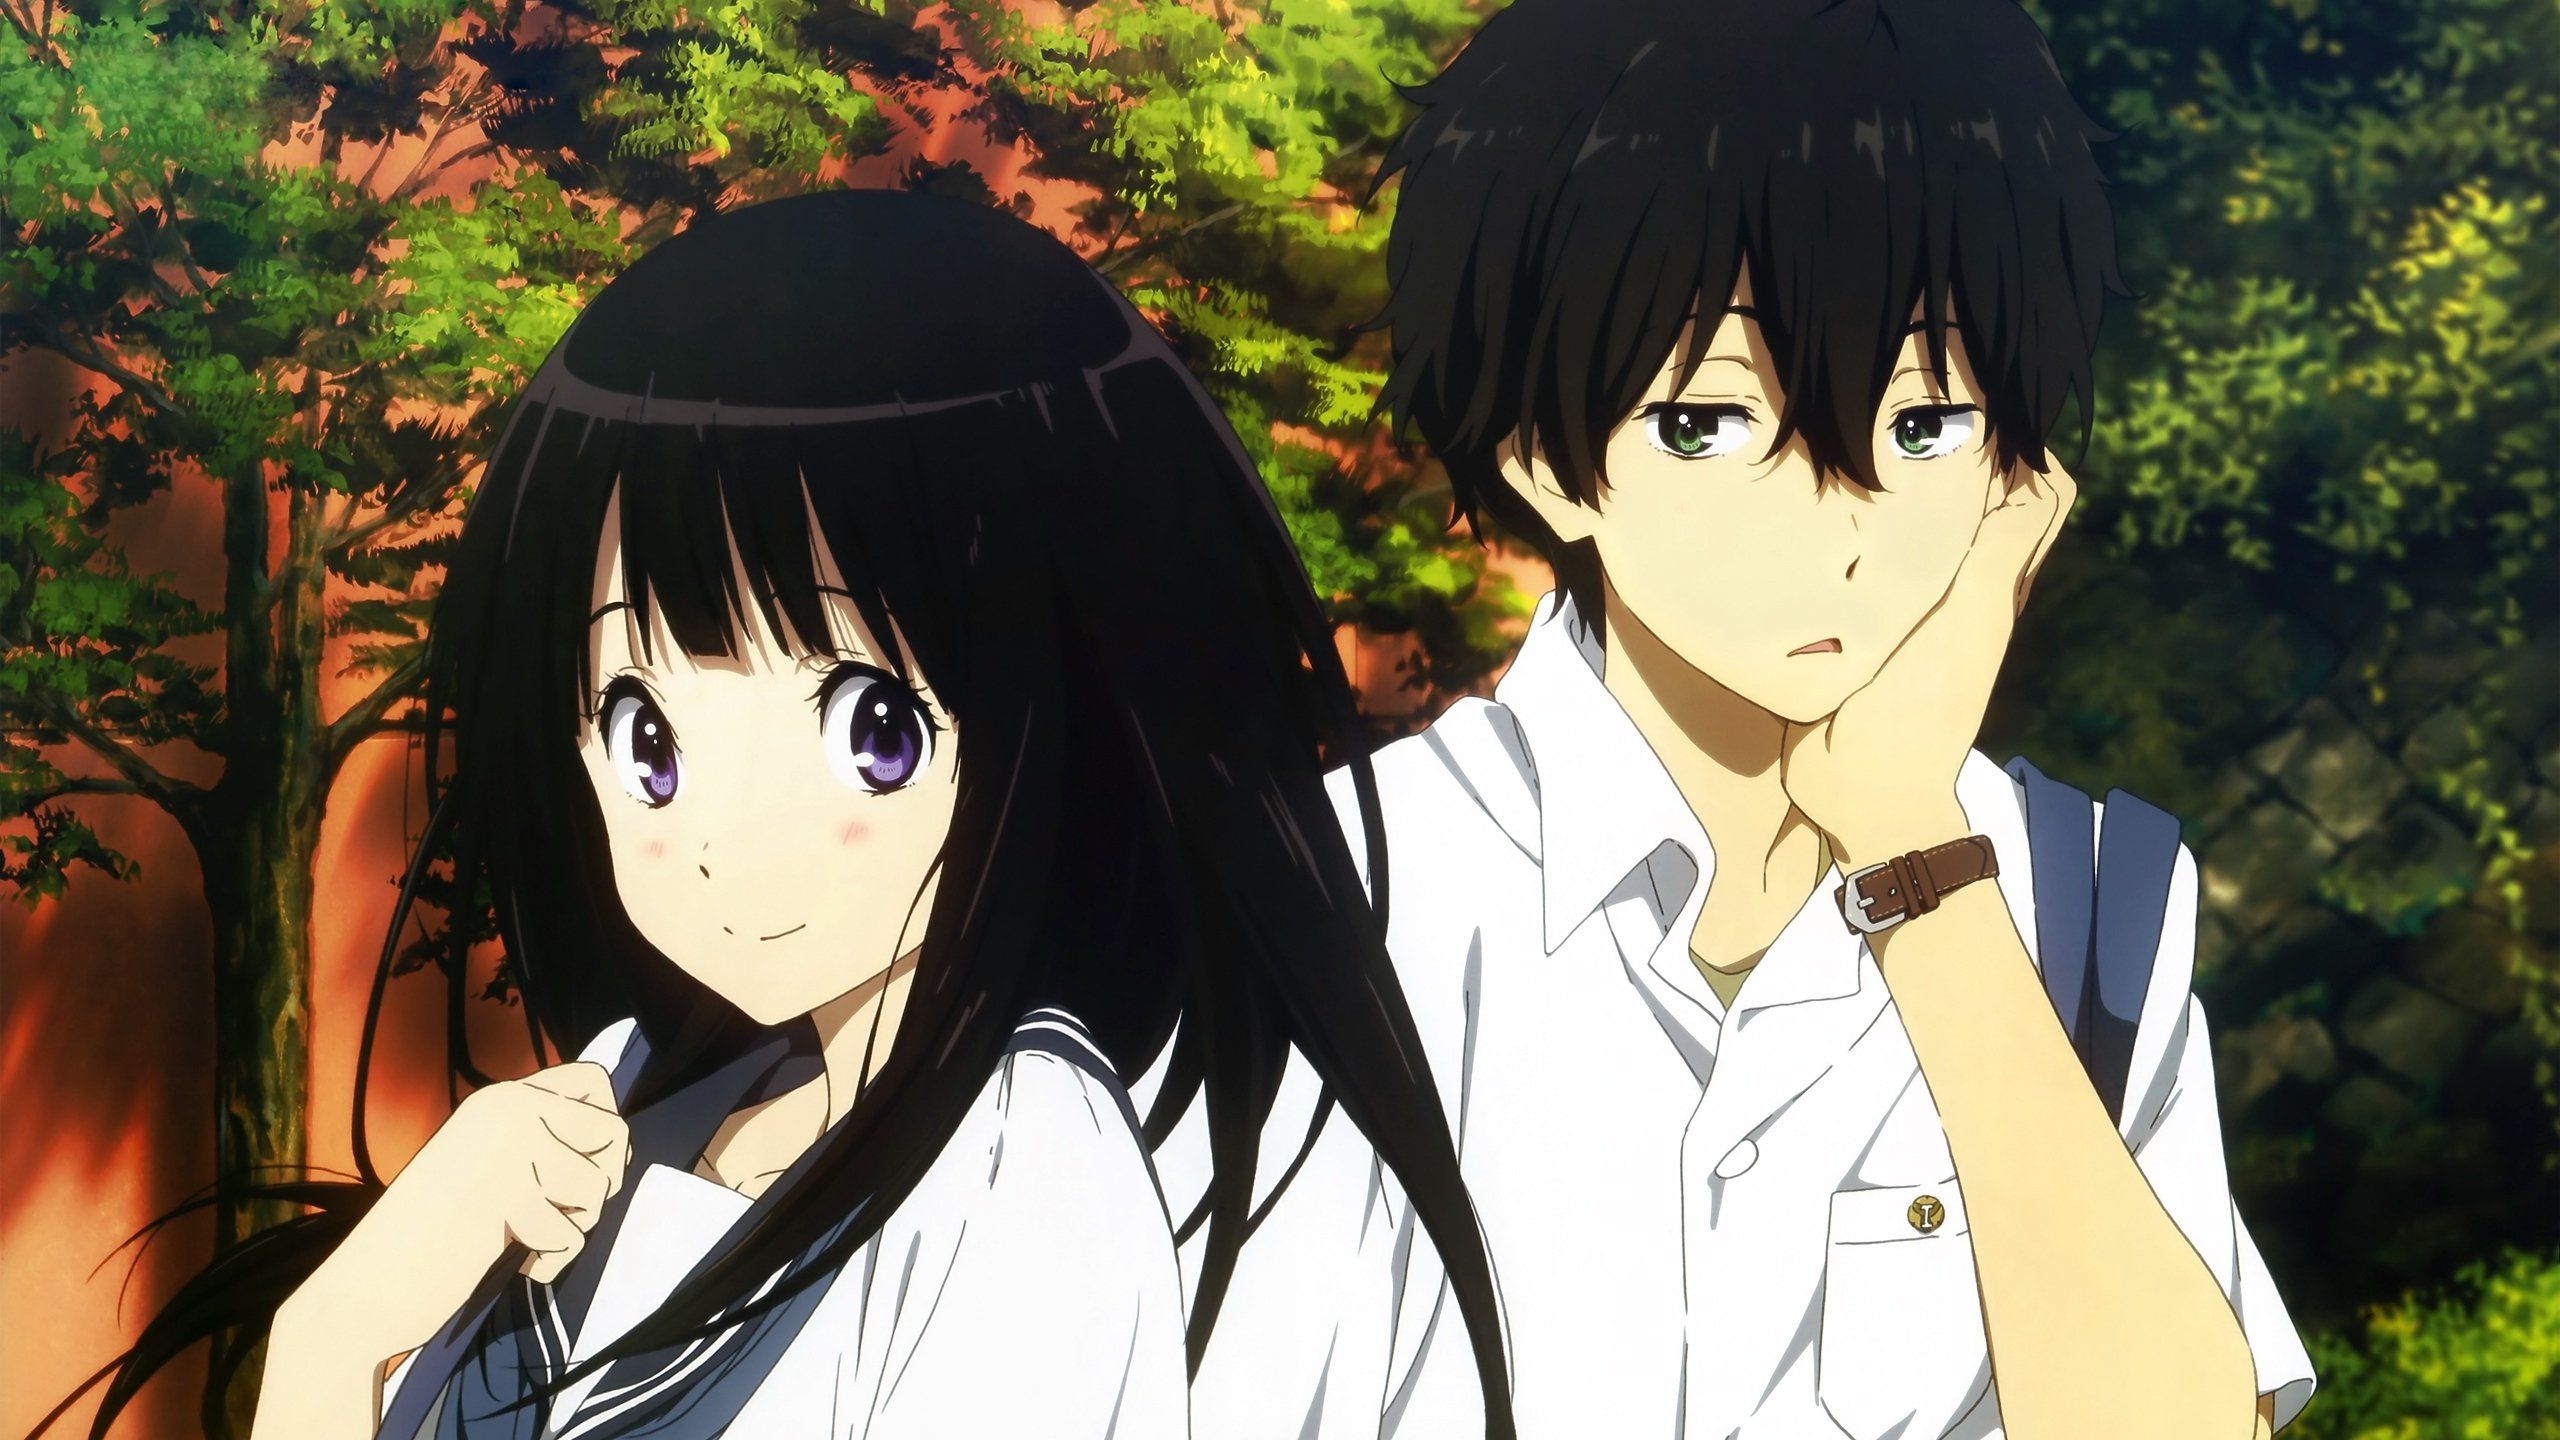 Hyouka Poster by Silk Printing # Size about (95cm x 60cm, 38inch x 24inch)  # Unique Gift # CB3A95: Posters & Prints - Amazon.com